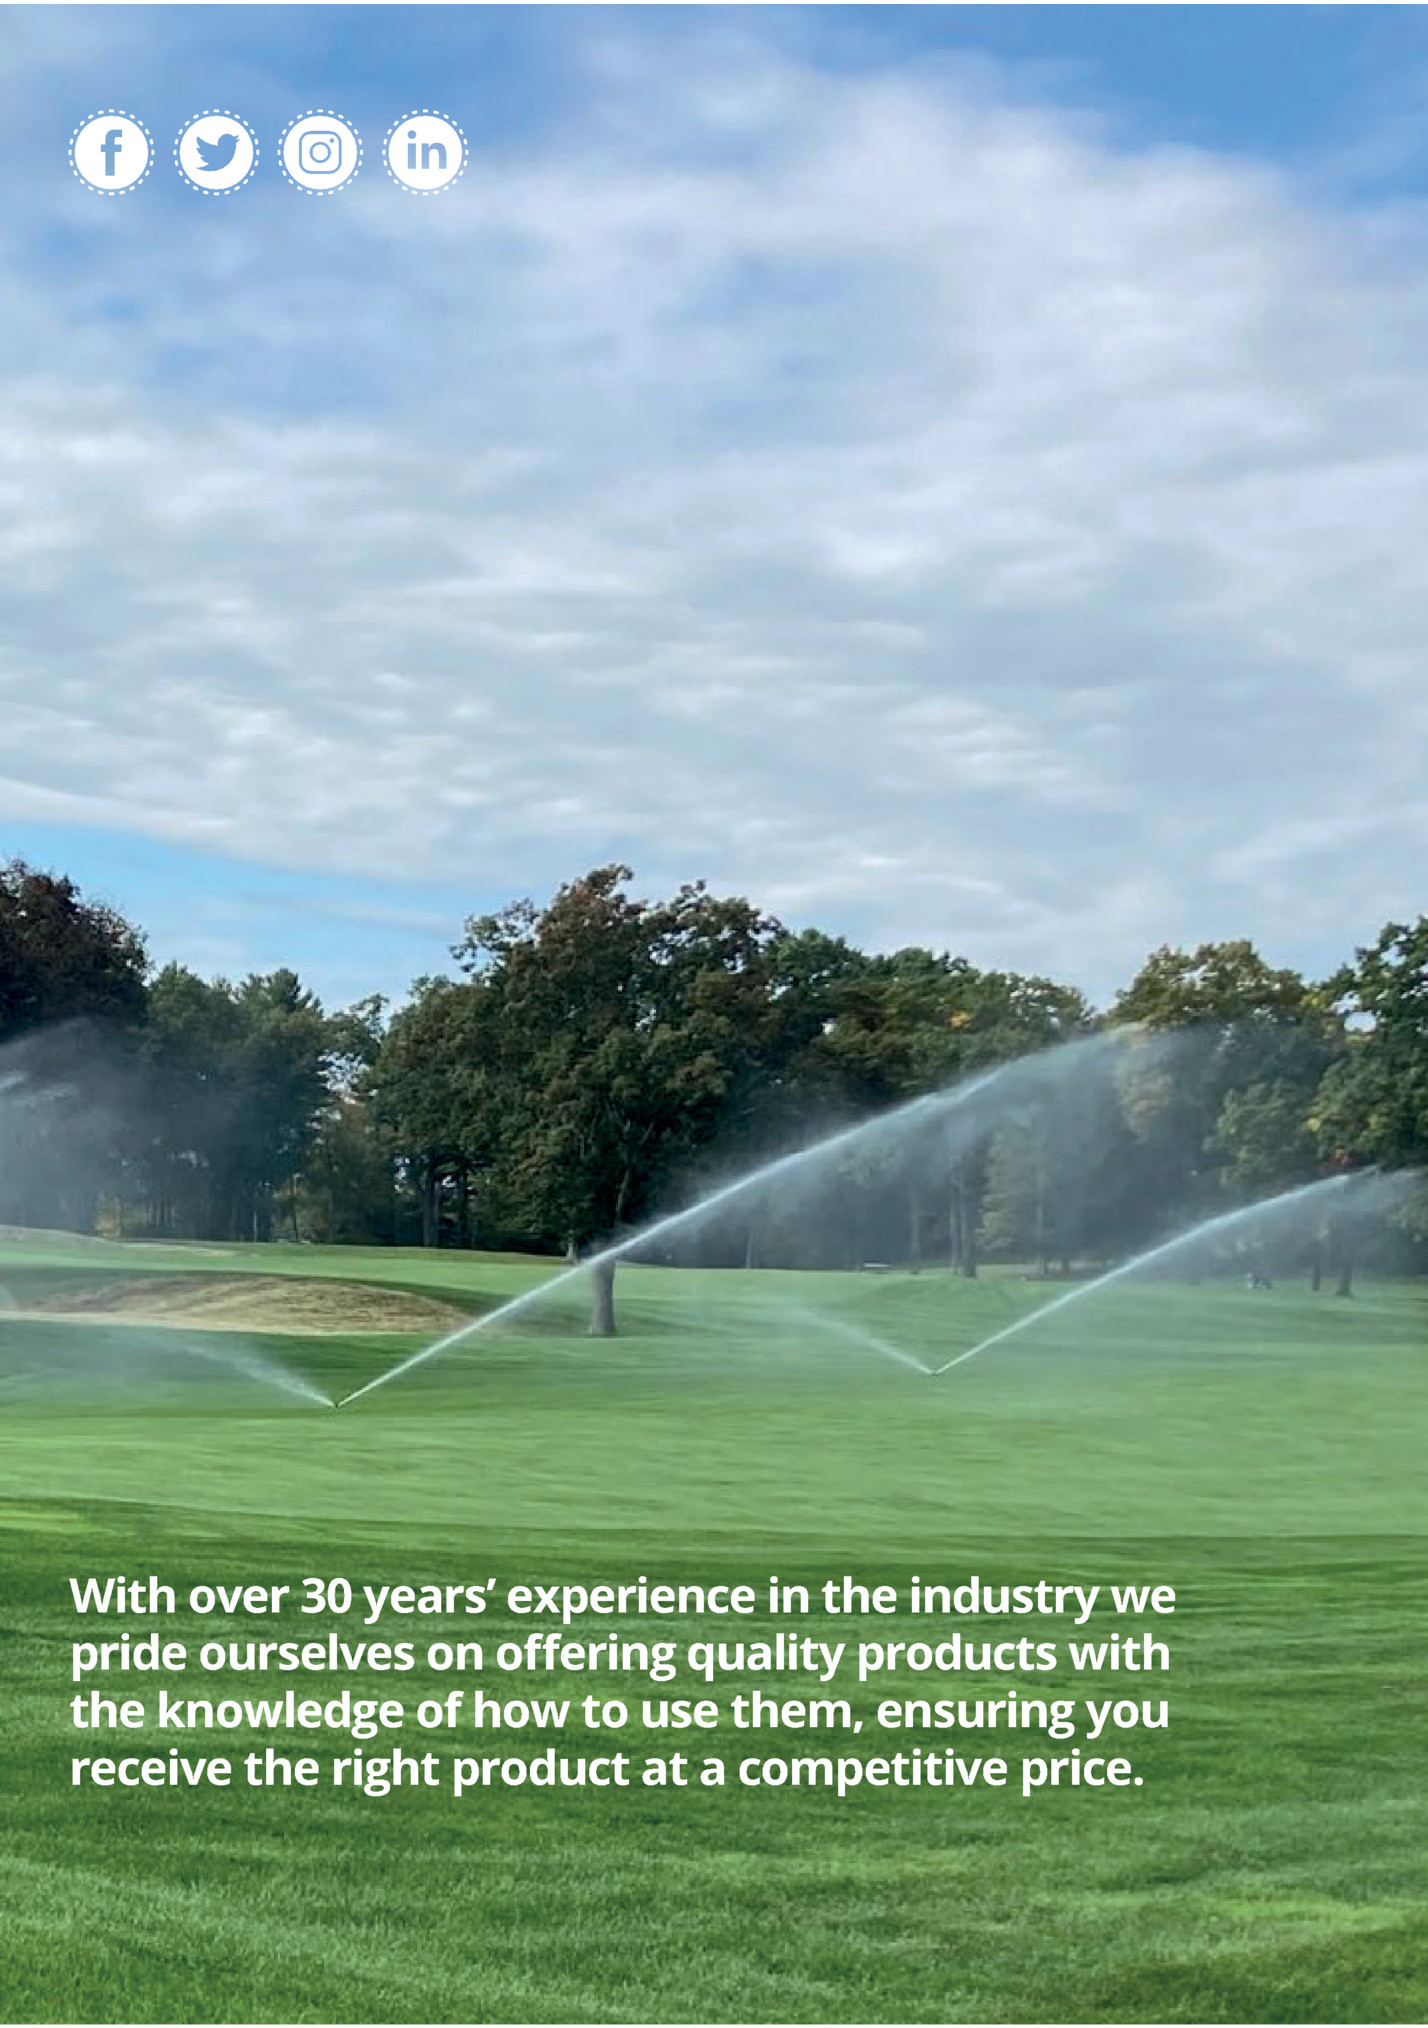 With over 30 years’ experience in the industry we